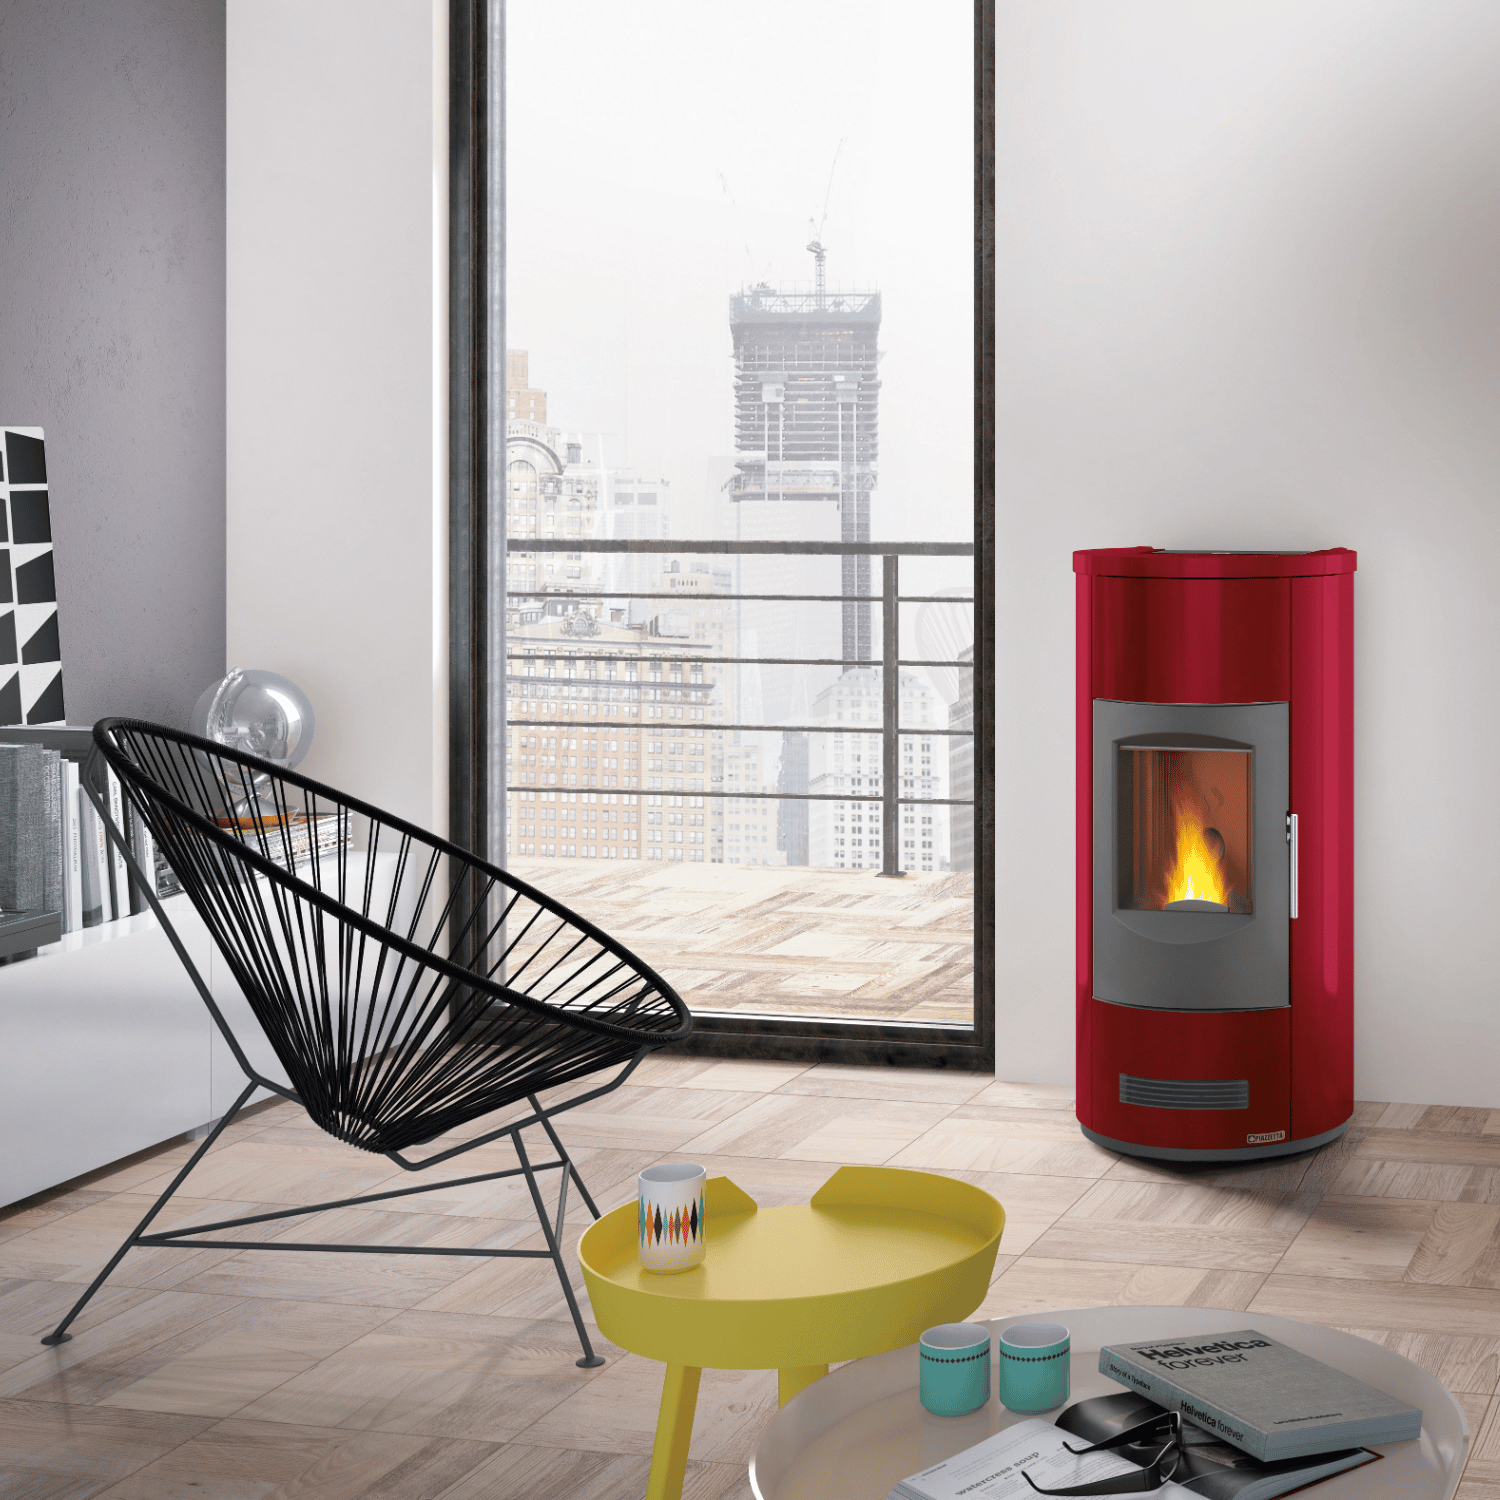 Stove P158 T Red – Piazzetta